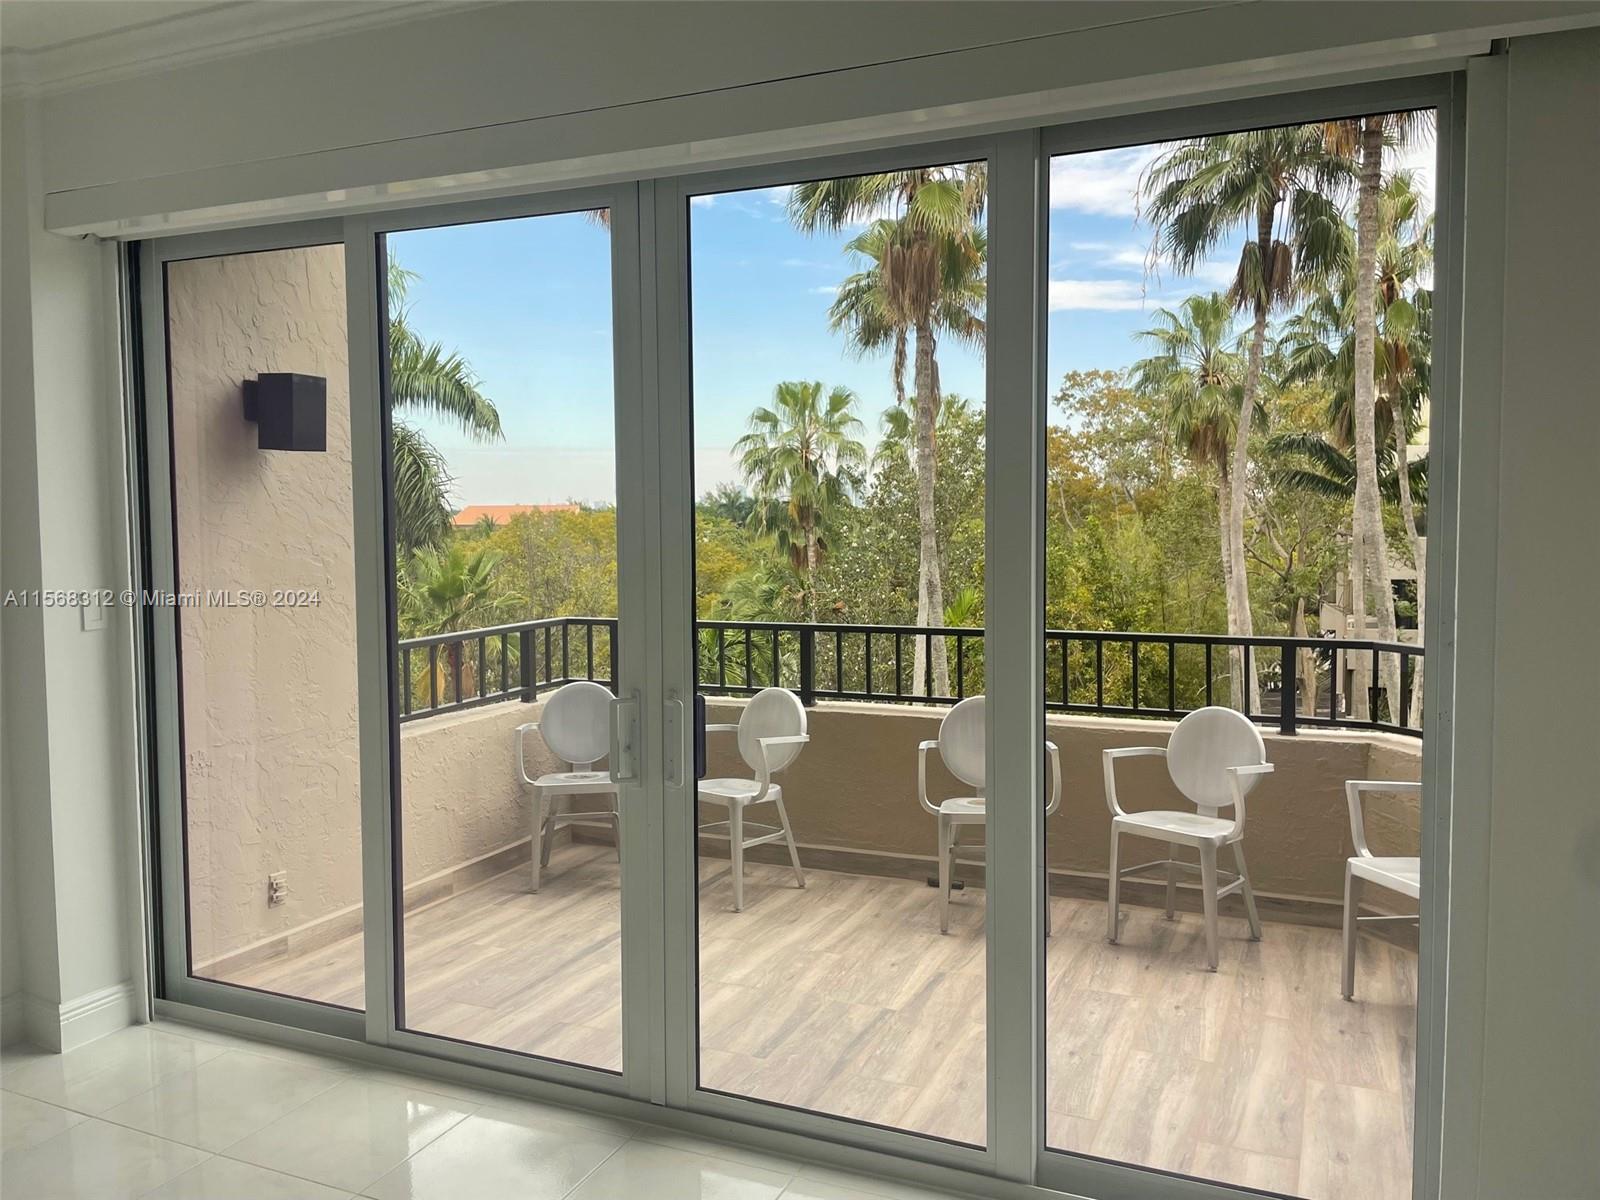 Two bedrooms, two bath, split-plan apartment overlooking the Emerald Bay lush gardens. Tiled floor throughout the apartment. Impact windows! One parking space.